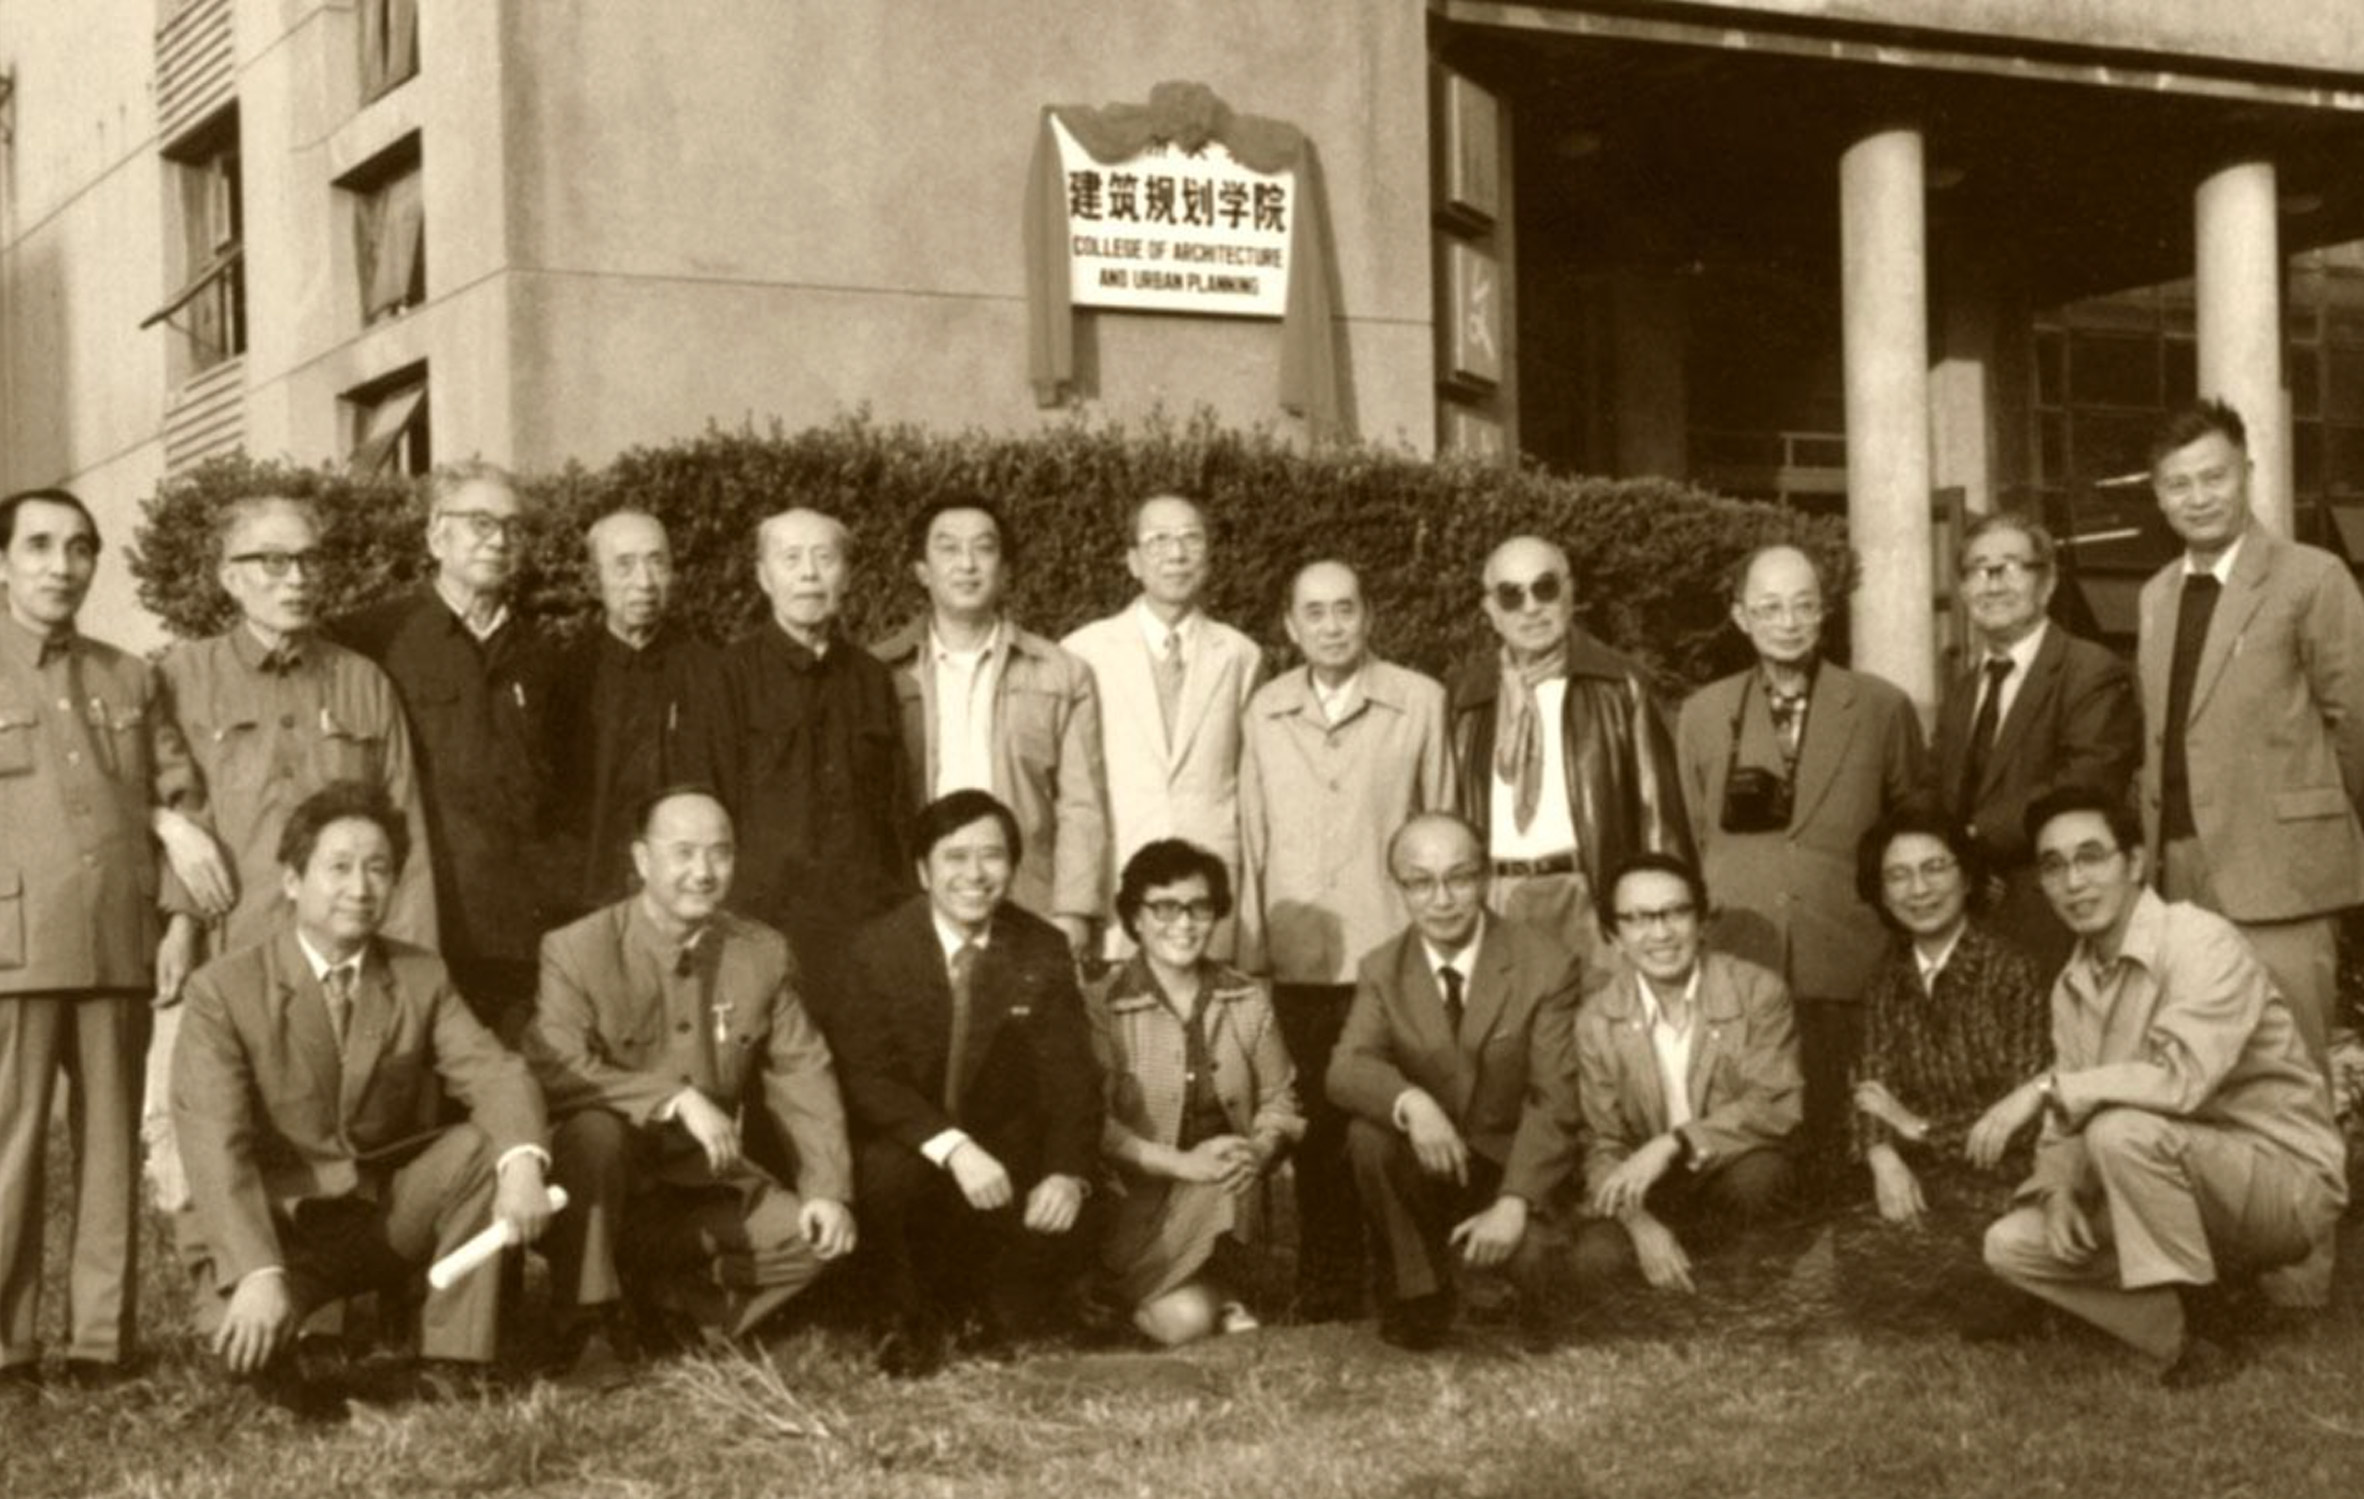 Photograph of the deans of CAUP